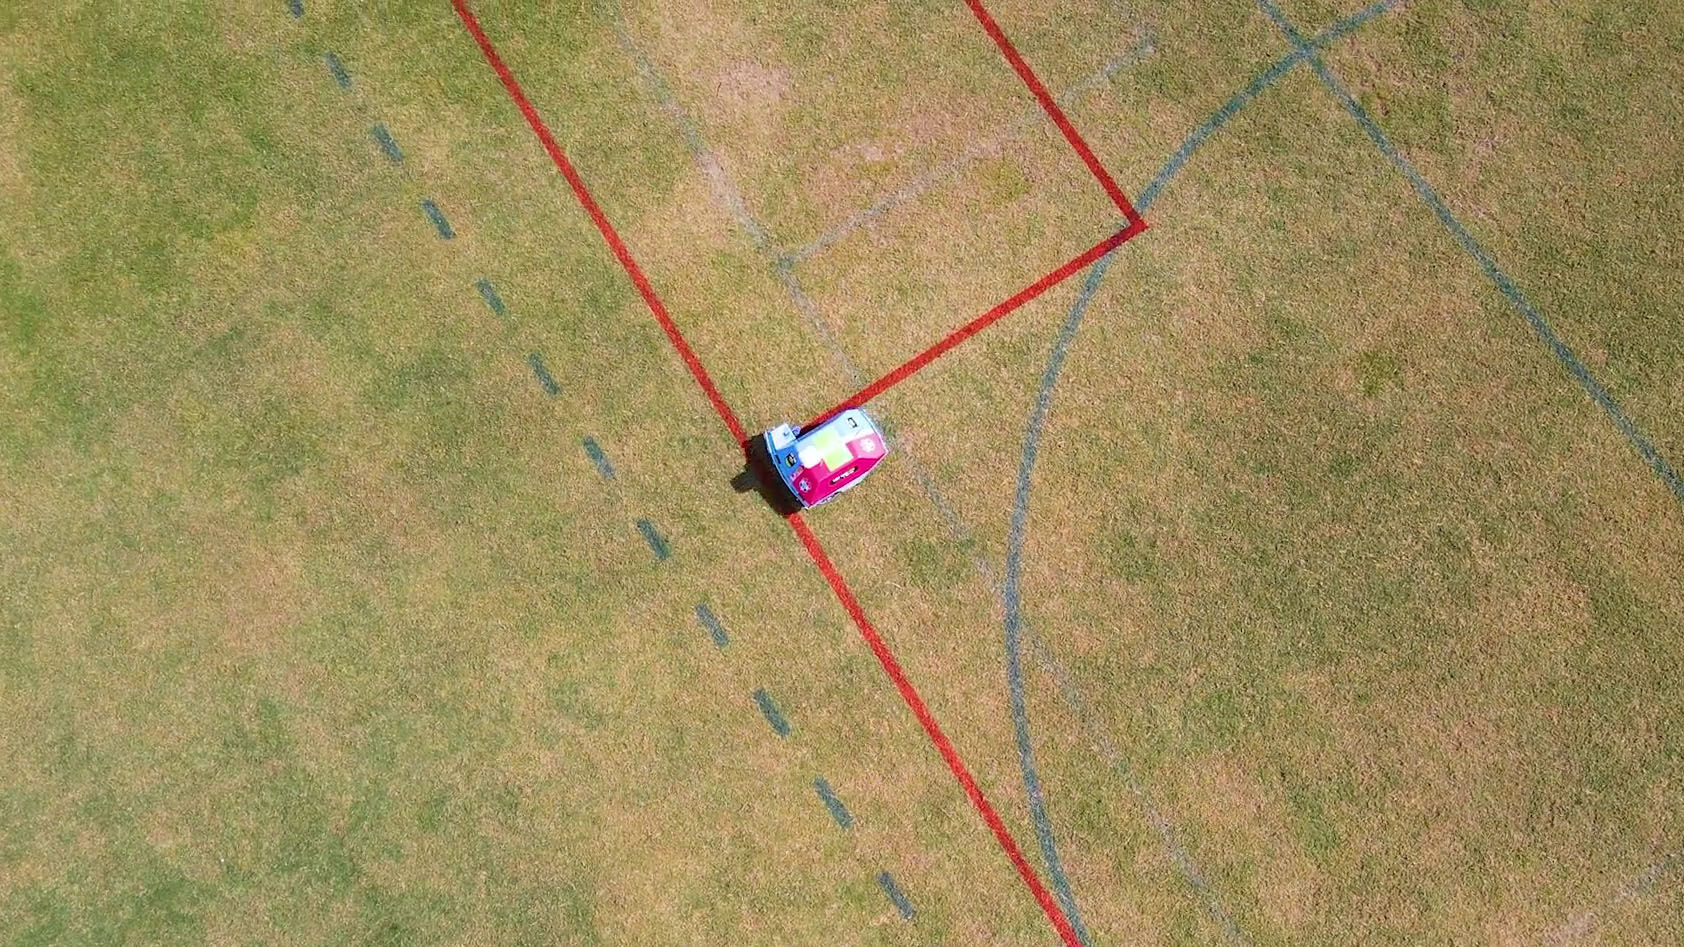 Autonomous line marking robot, Turf Tank, painting red and blue soccer field training lines